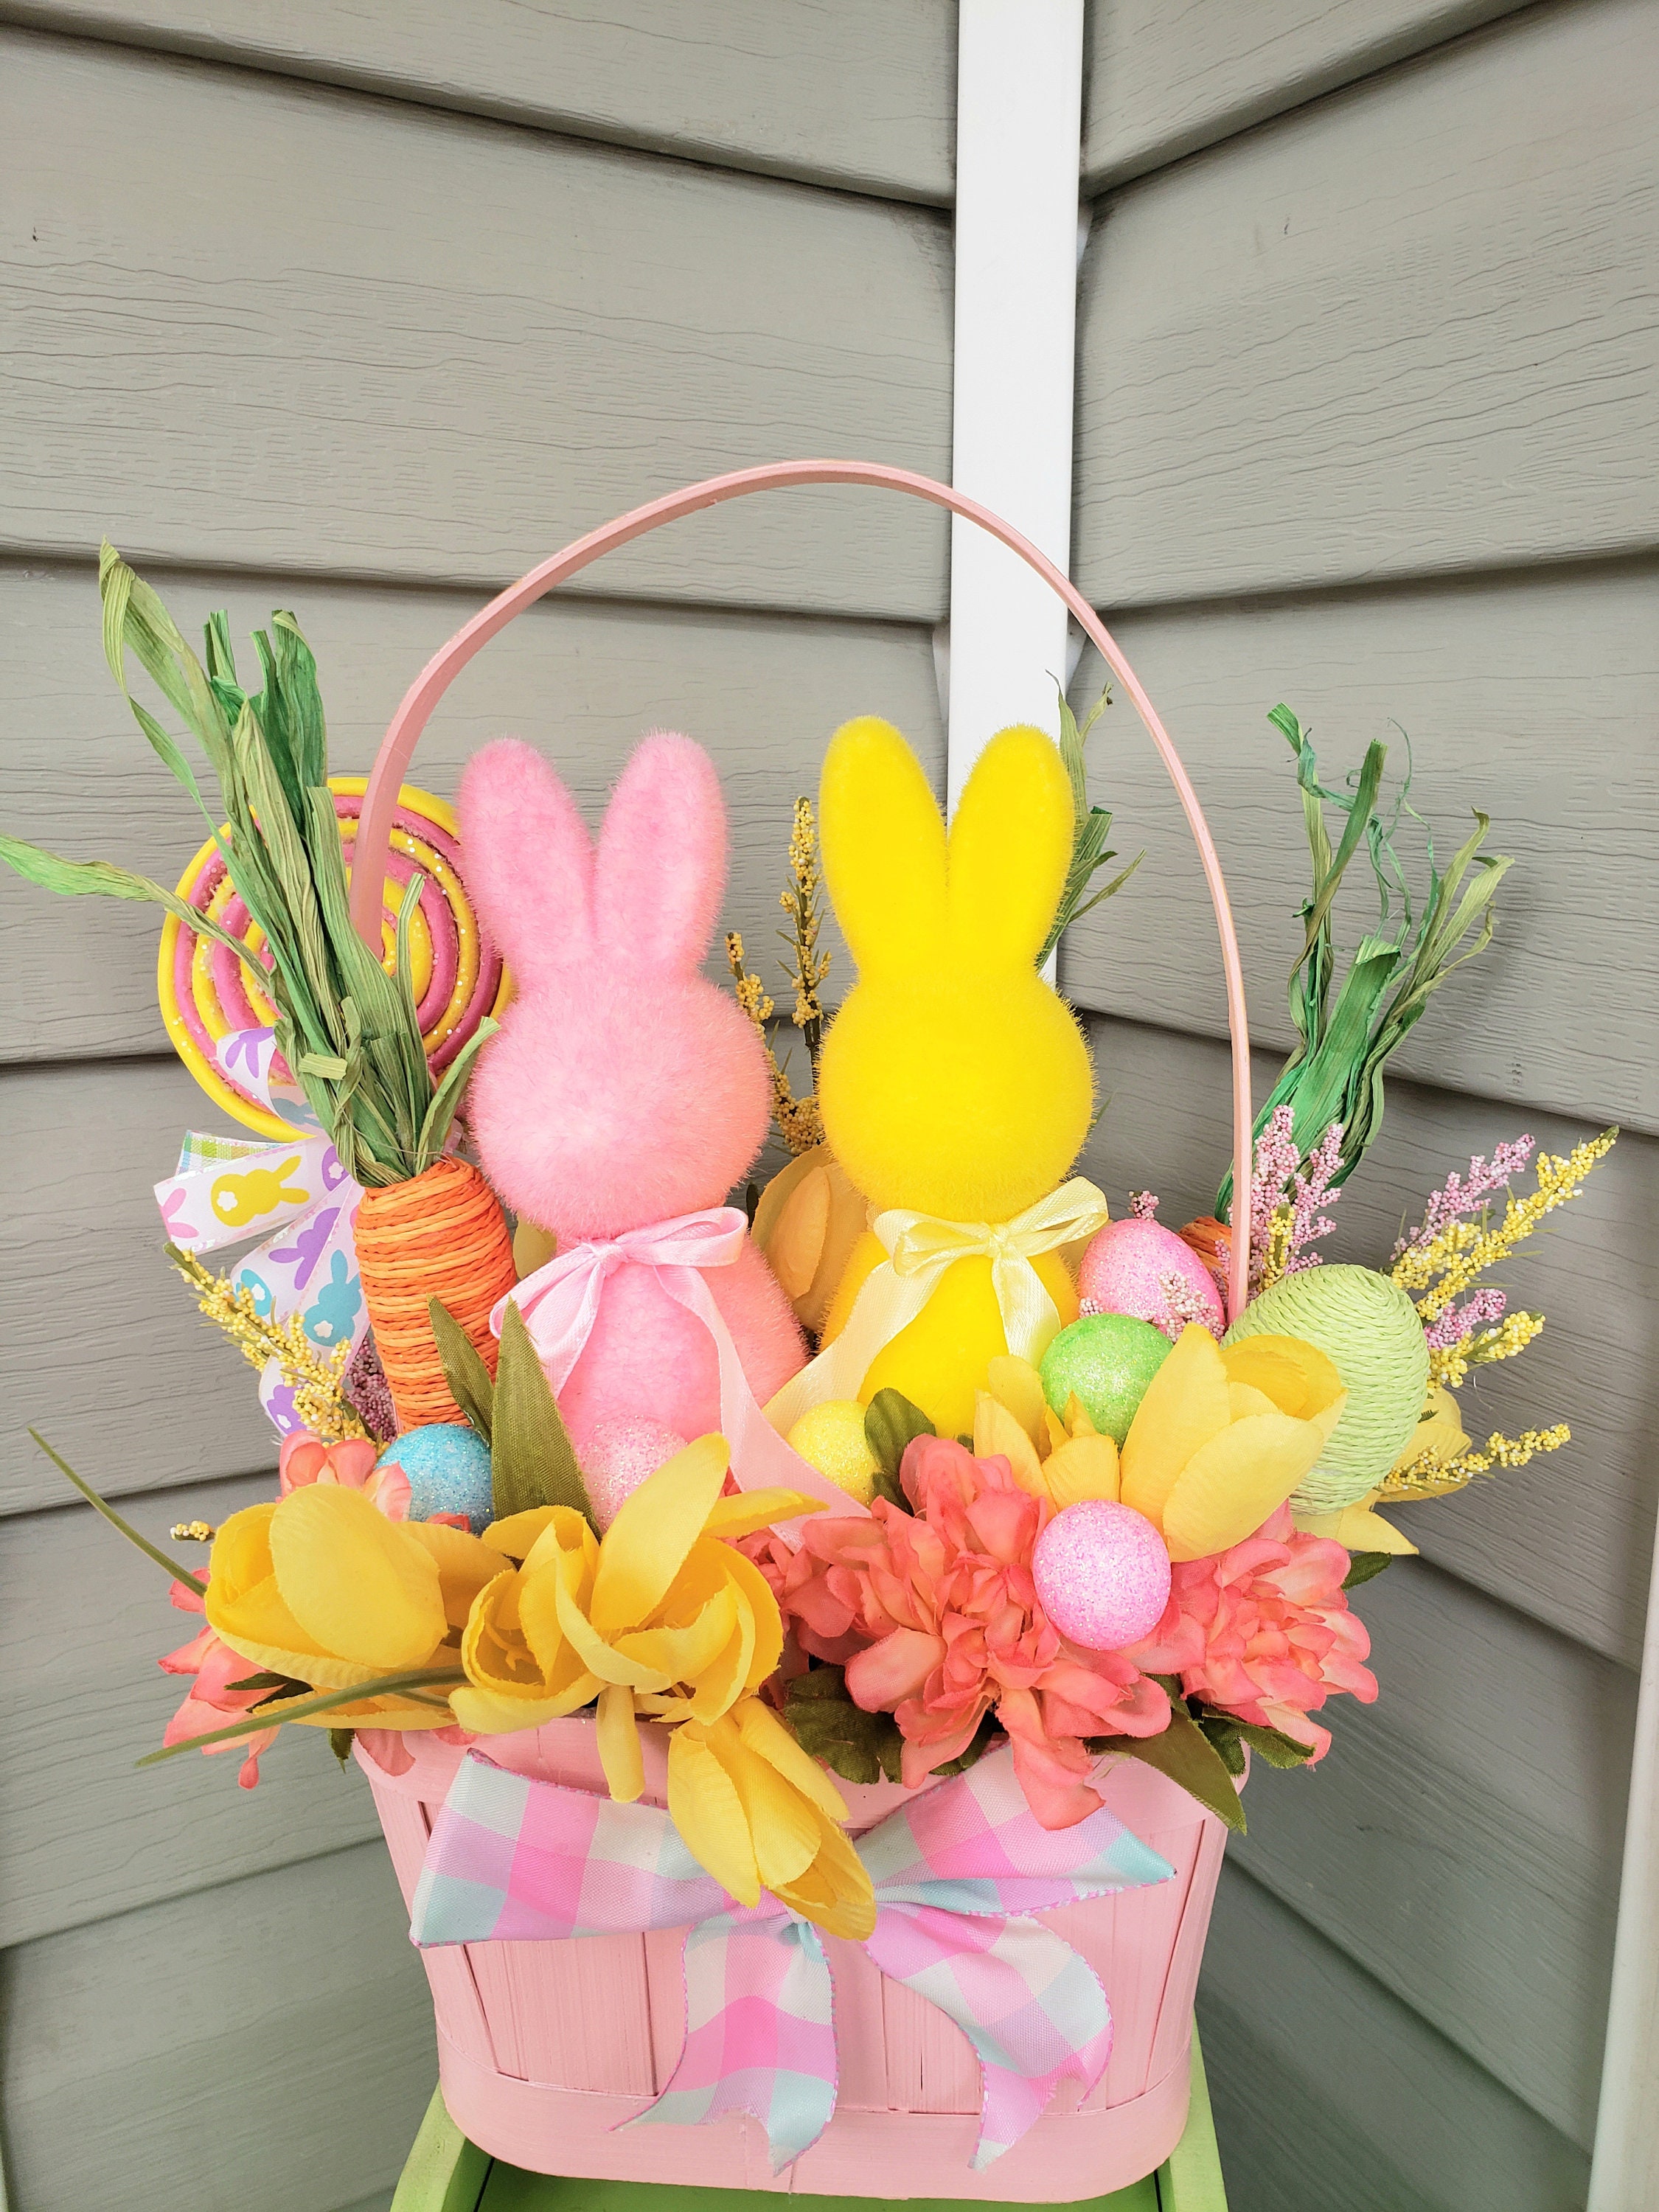 100 Cheap and Easy DIY Easter Decor Ideas - Prudent Penny Pincher